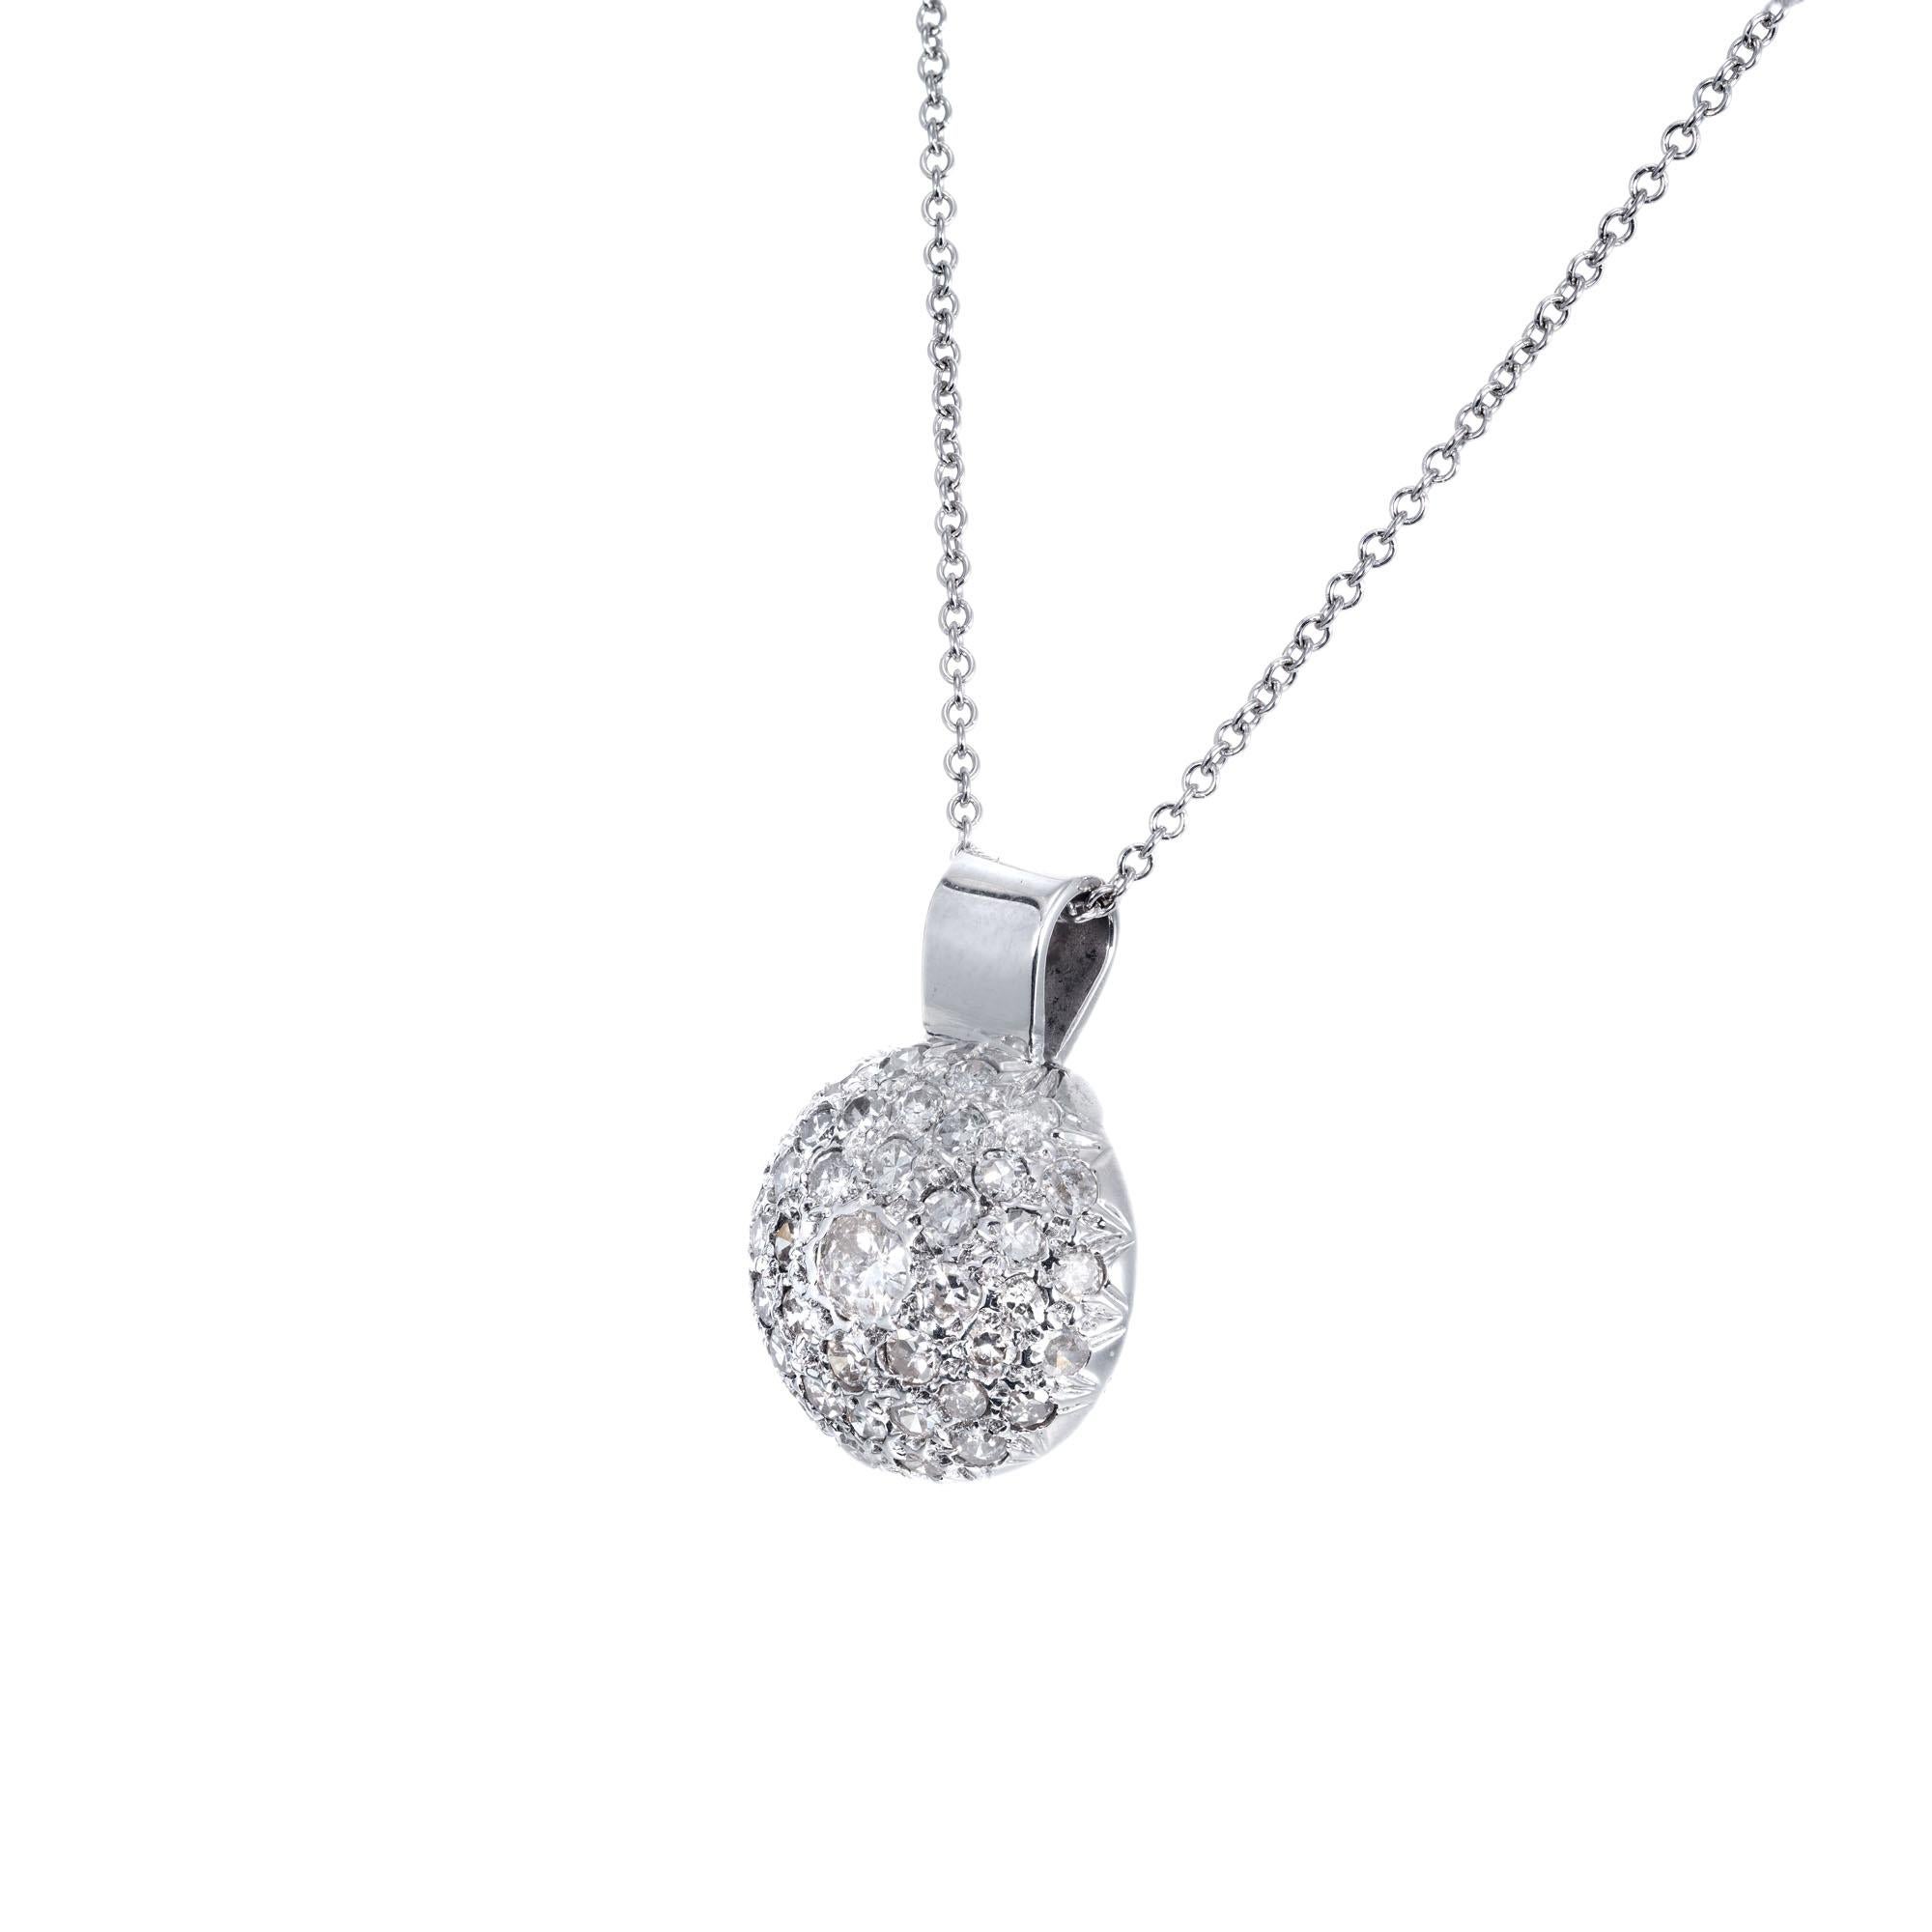 Round domed pave set diamond cluster pendant necklace in 14k white gold on a 16 inch chain.  

41 round brilliant cut diamonds I-J, SI-I approx..95ct
14k white gold 
Stamped: 14k
4.6 grams
Top to bottom: 20.5mm or 4/5 Inch
Width: 16.3mm or .5